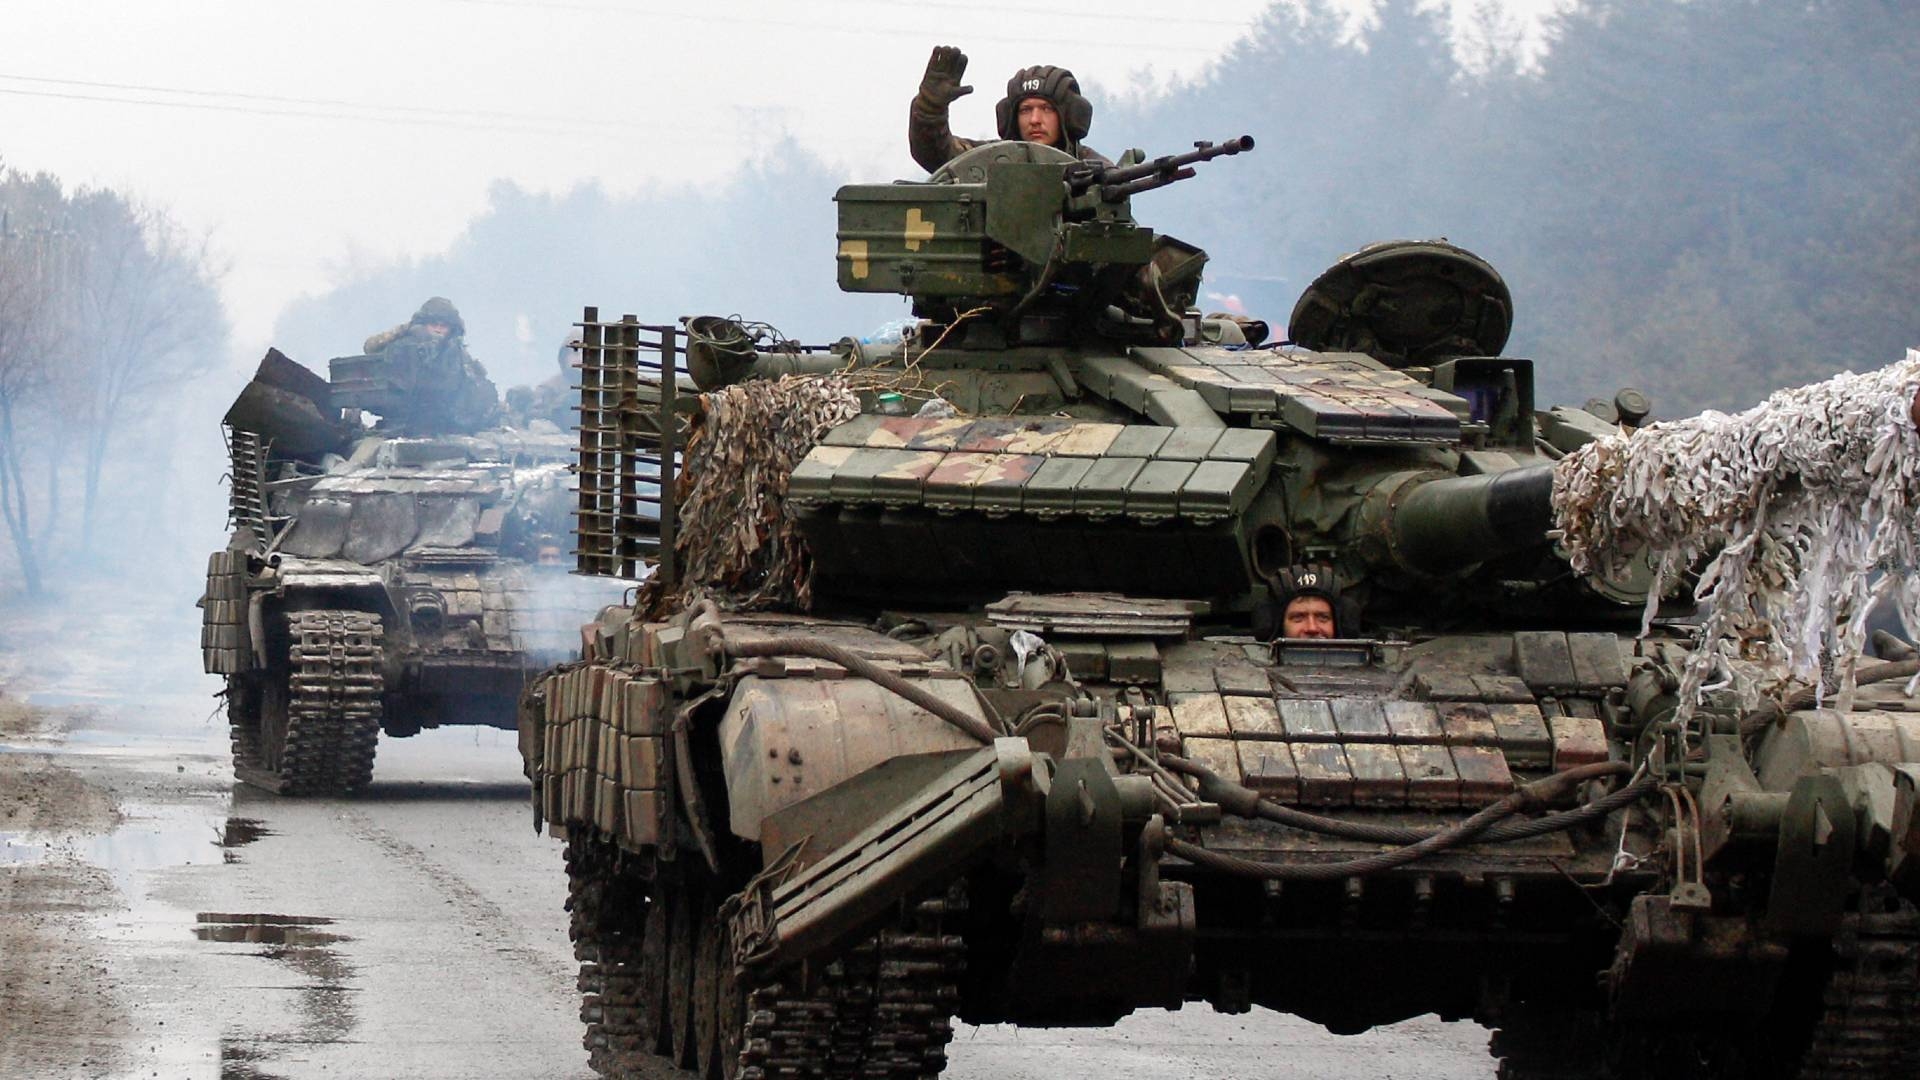 Ukrainian servicemen ride on tanks towards the front line with Russian forces in the Lugansk region of Ukraine on 25 February 2022.